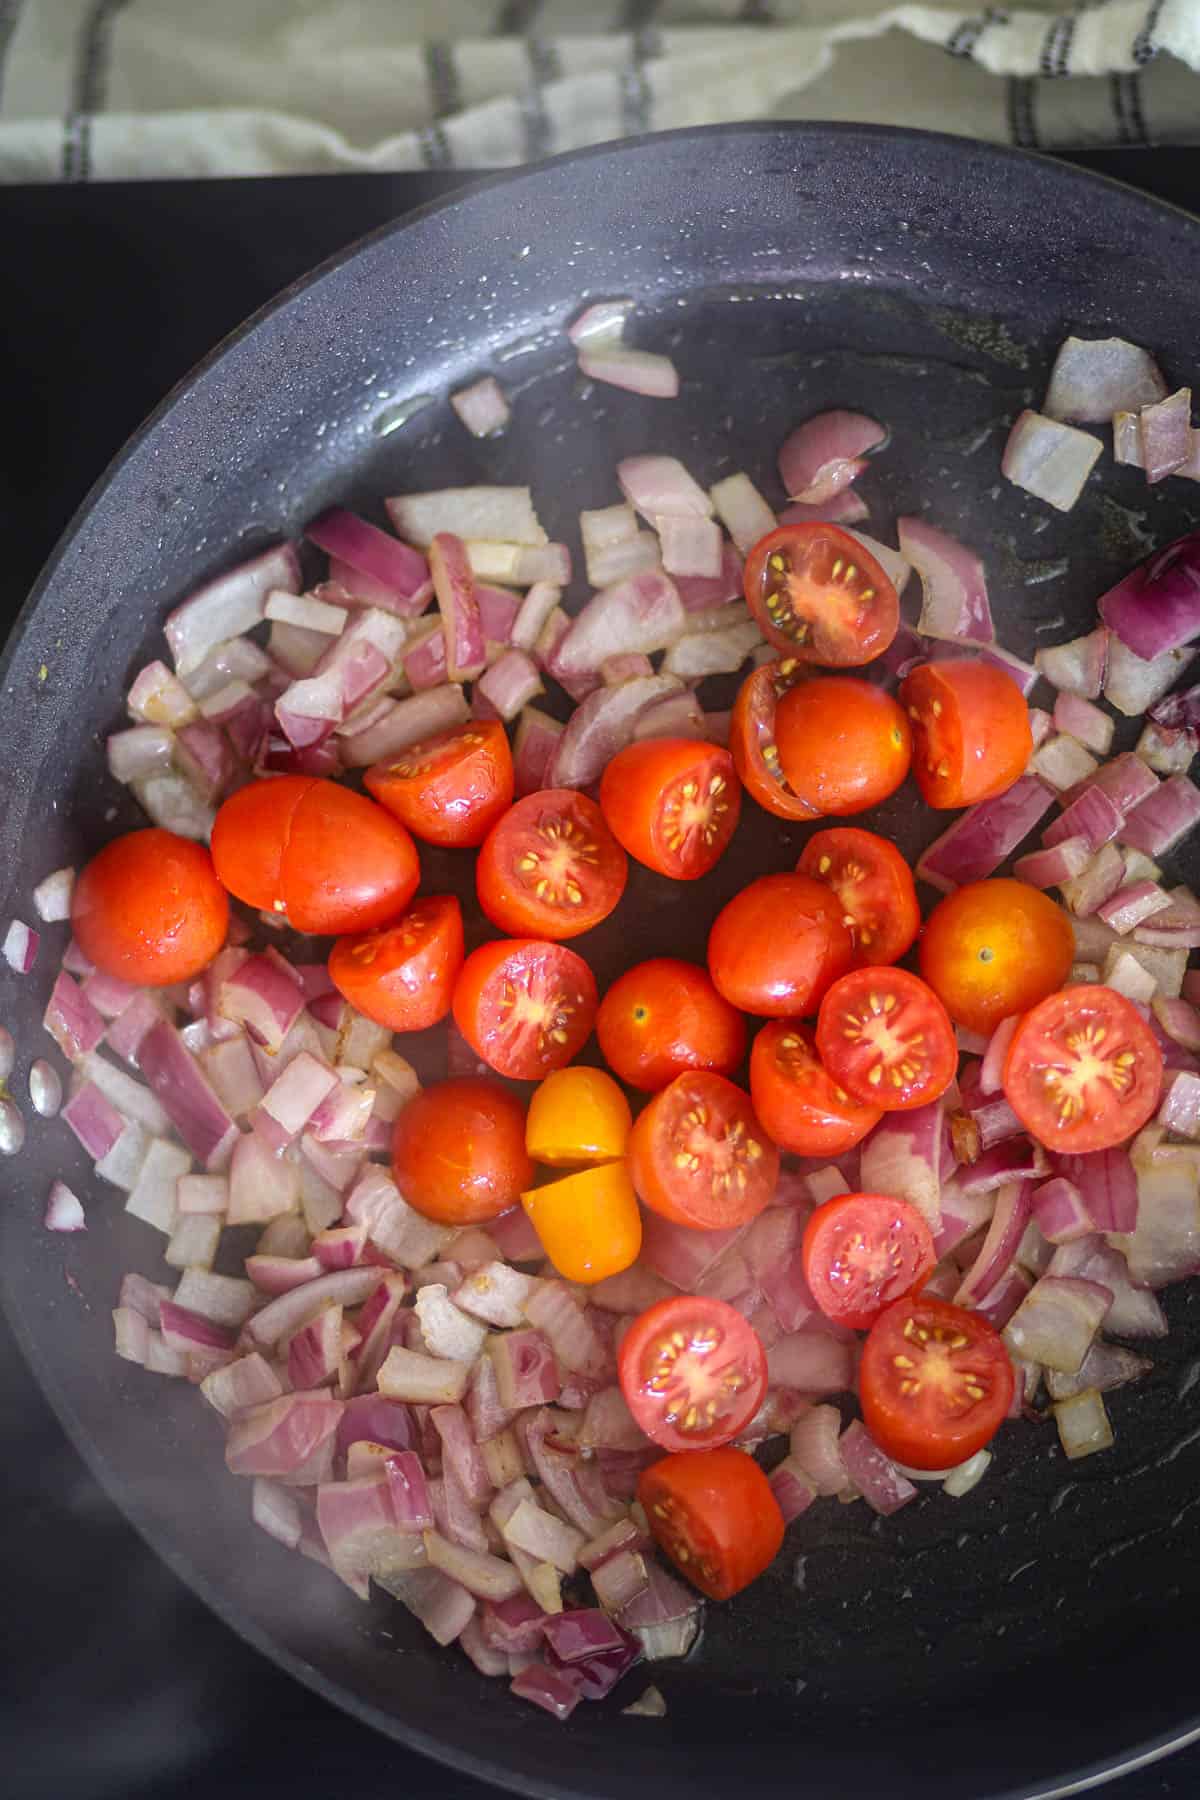 Add cherry tomatoes and cook for 2-3 minutes.